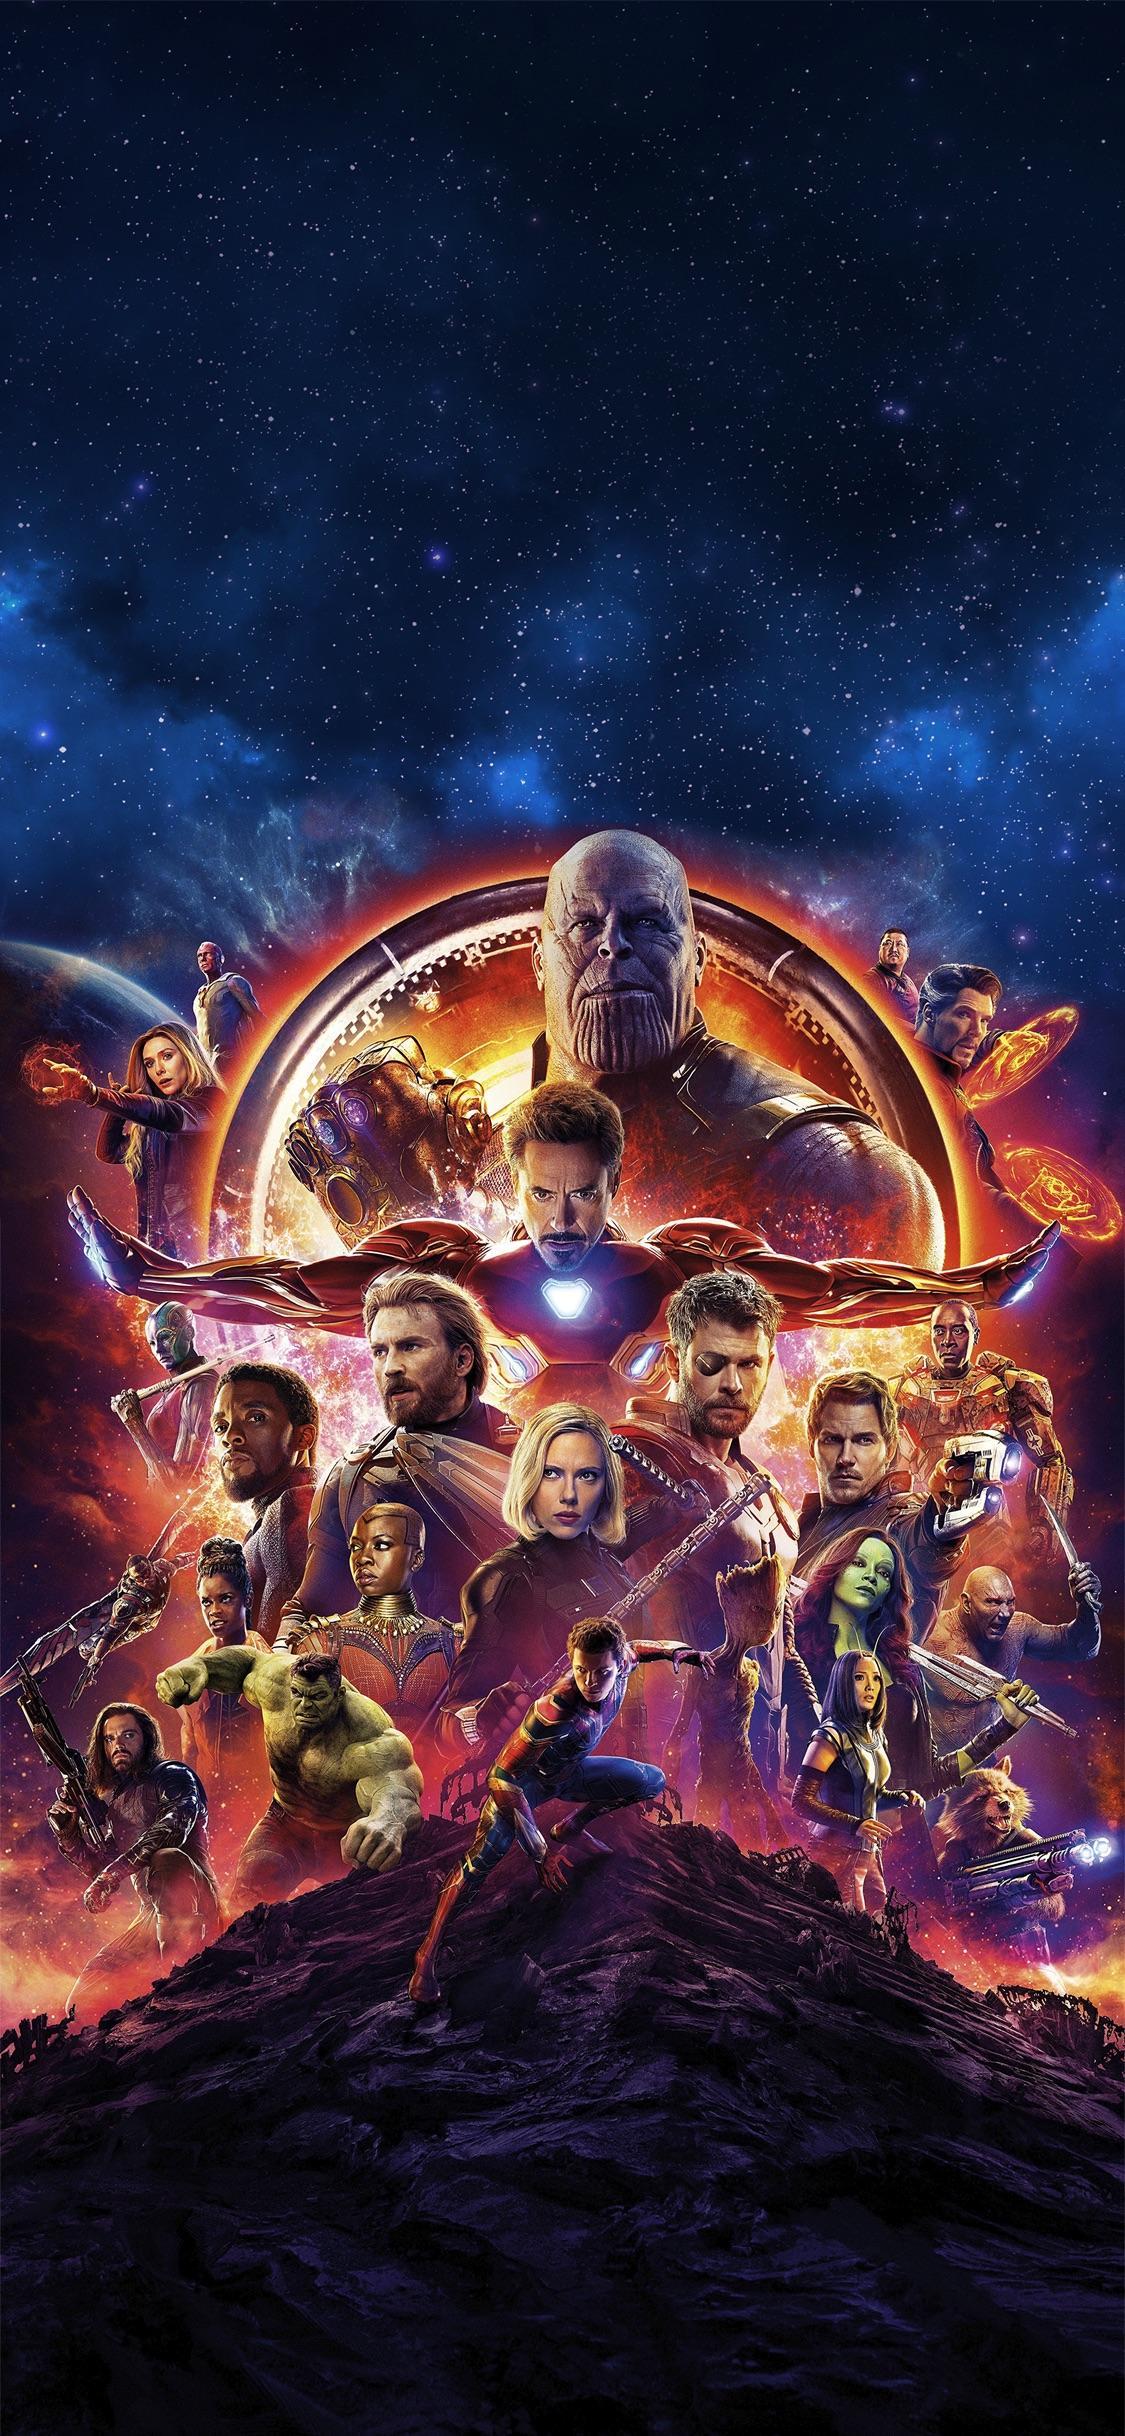 I made an Infinity War wallpaper optimised for iPhone X